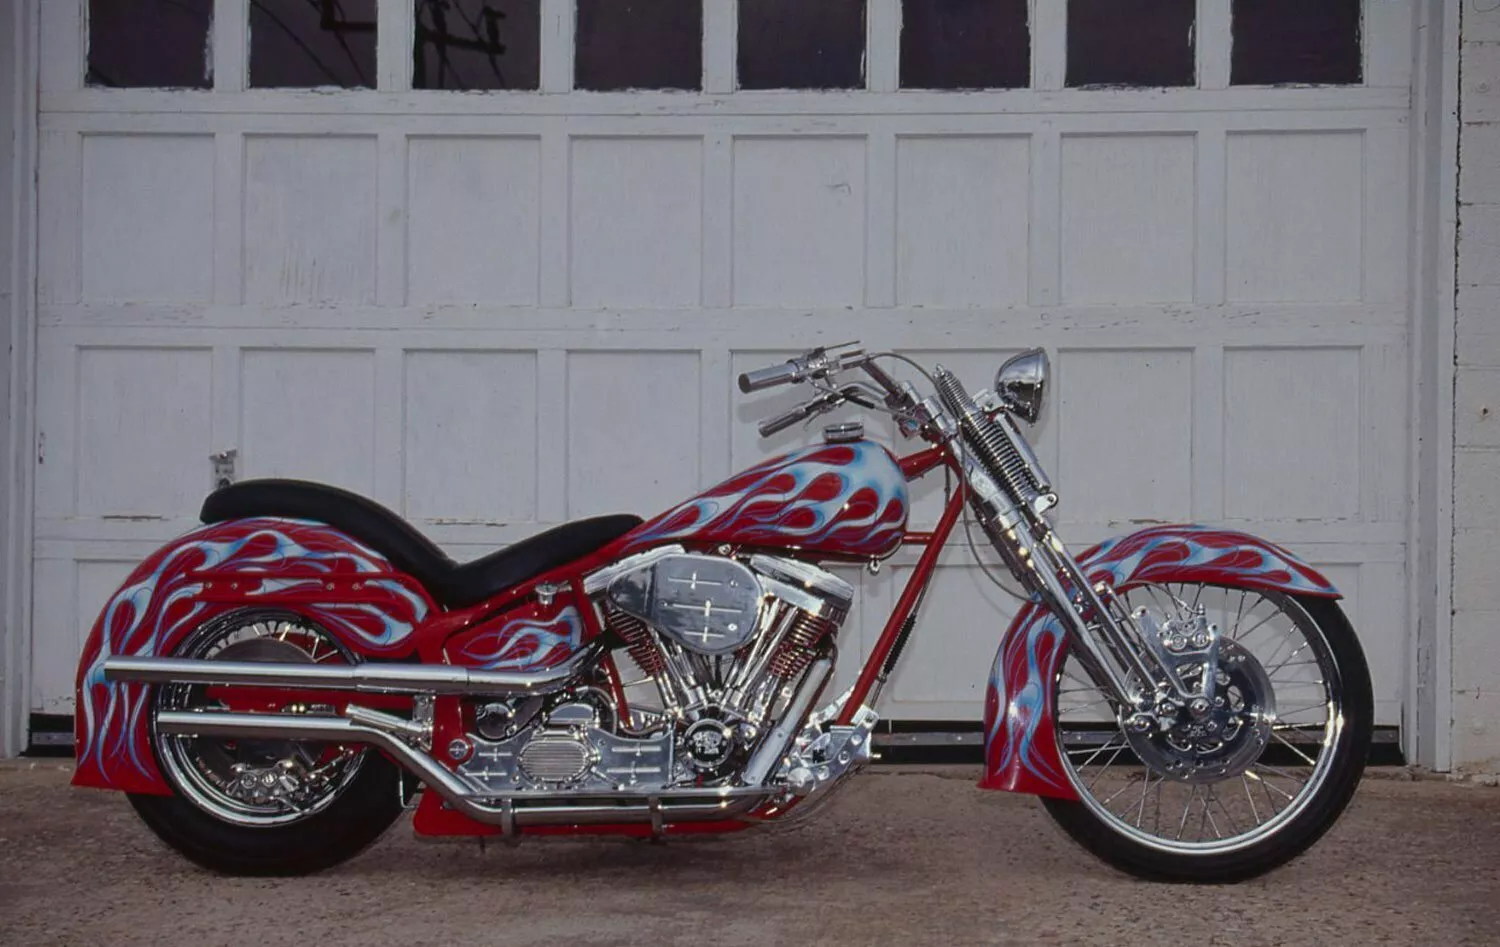 Ed Kerr’s 1990 Softail Springer pops with Porsche Red, white blue flames, and pinstriping.